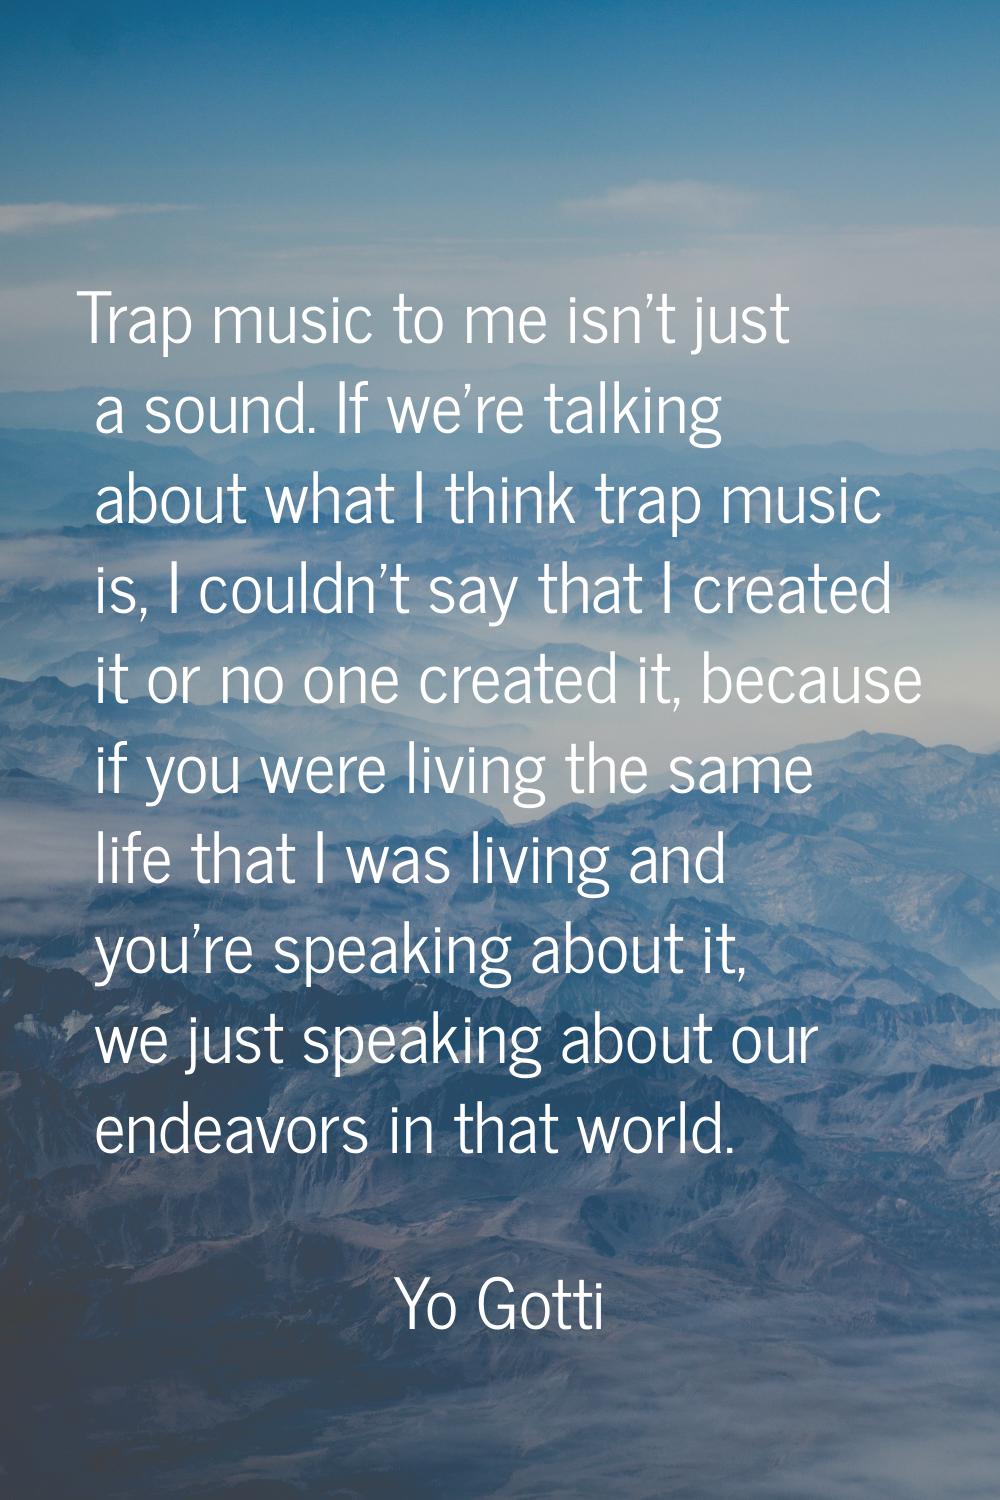 Trap music to me isn't just a sound. If we're talking about what I think trap music is, I couldn't 